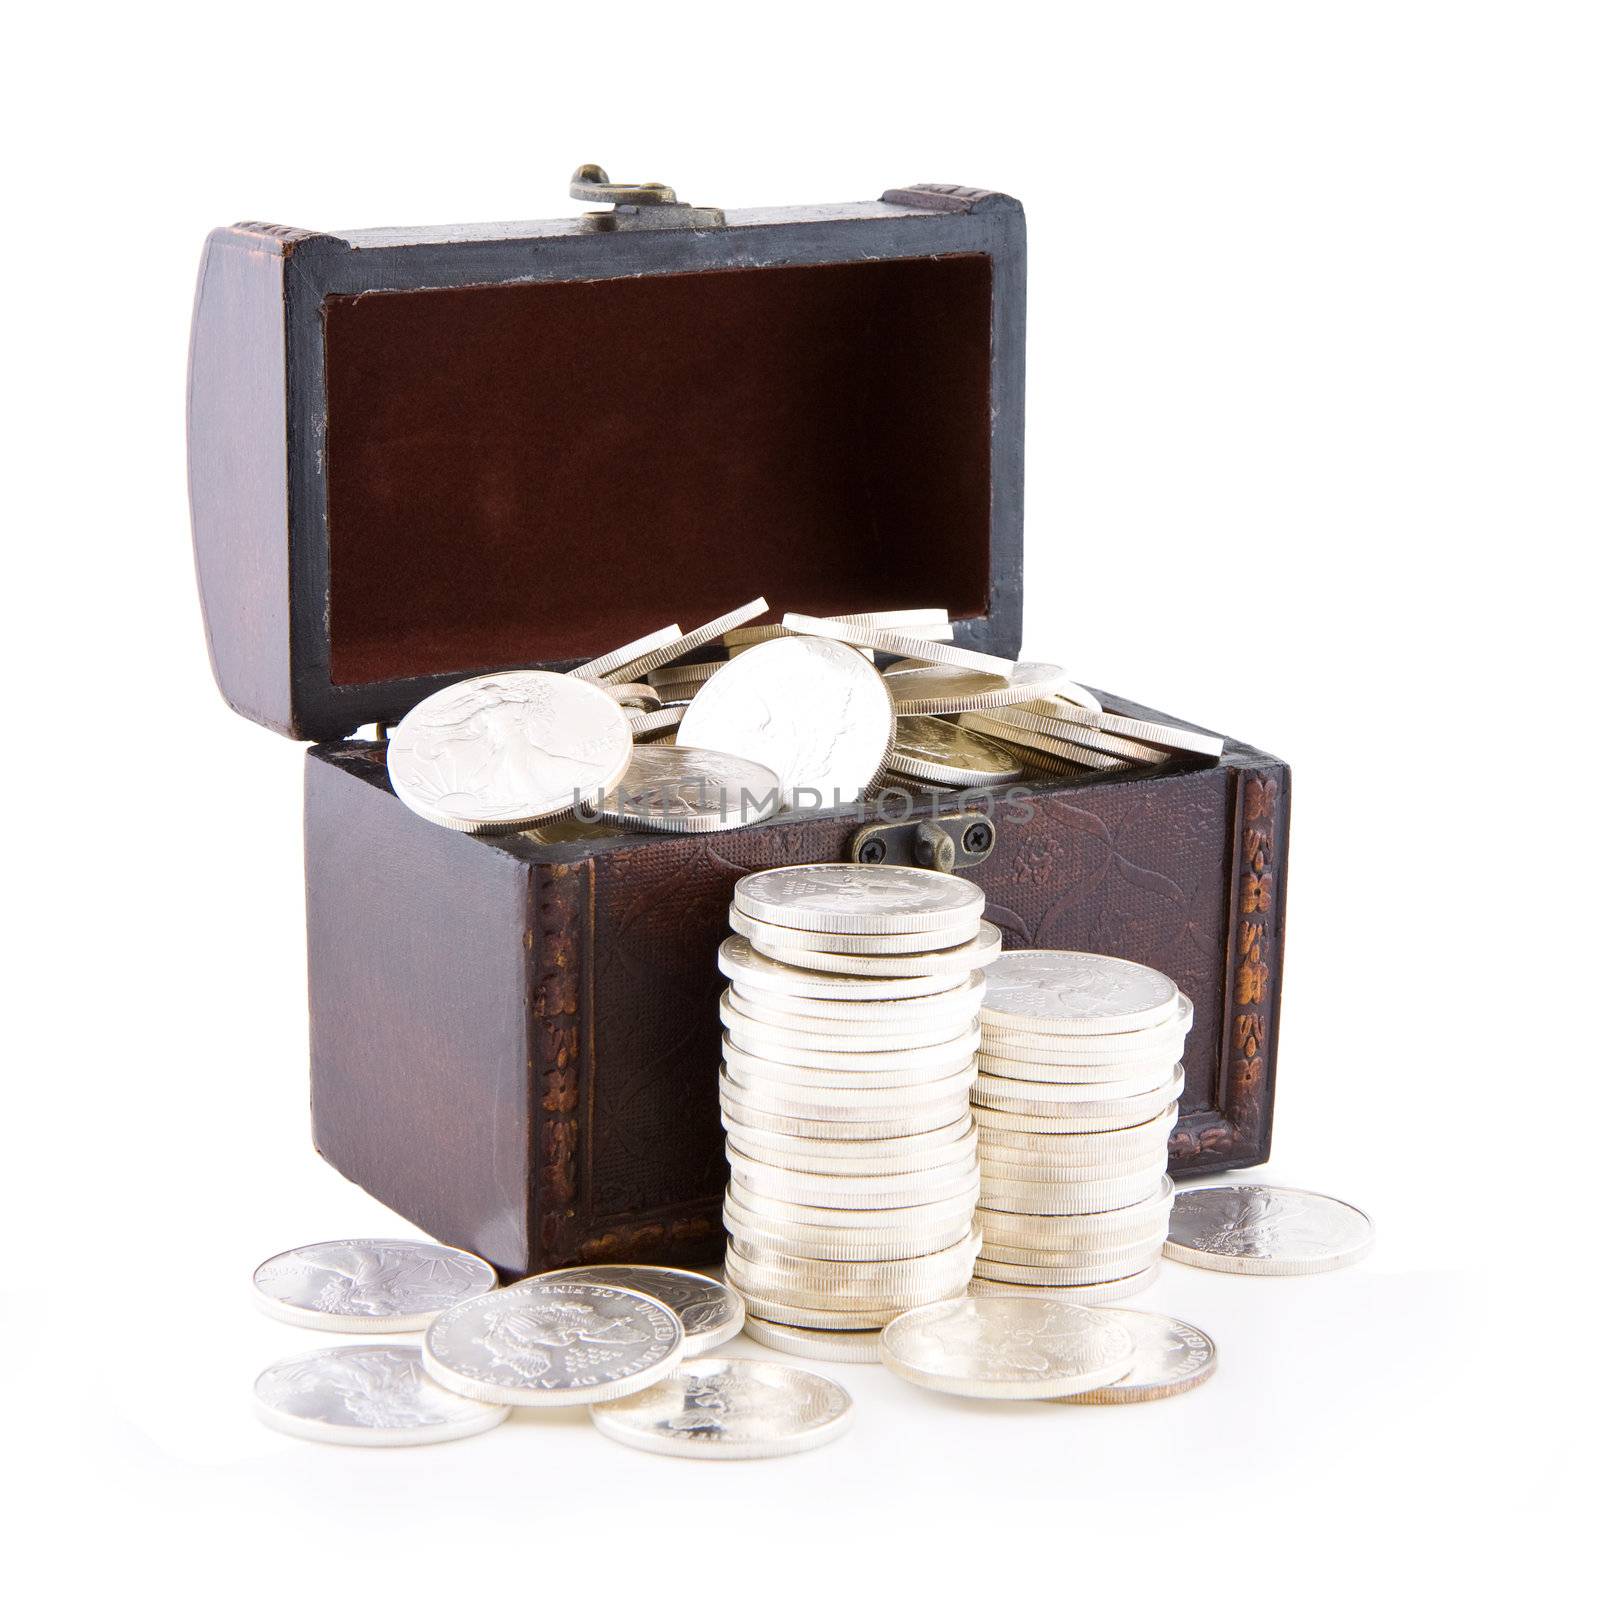 Case of silver coins by Gbuglok